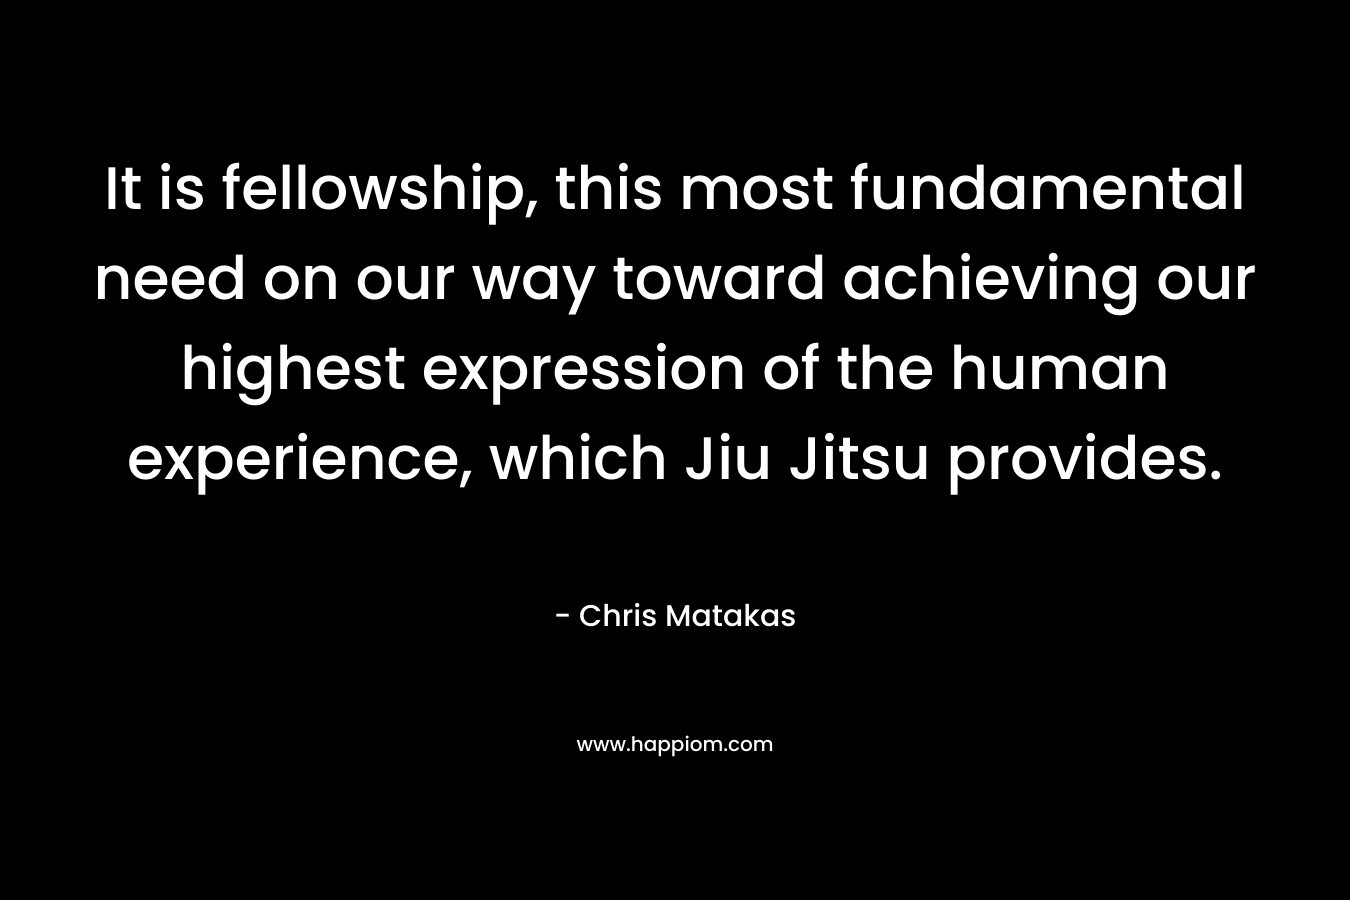 It is fellowship, this most fundamental need on our way toward achieving our highest expression of the human experience, which Jiu Jitsu provides. – Chris Matakas